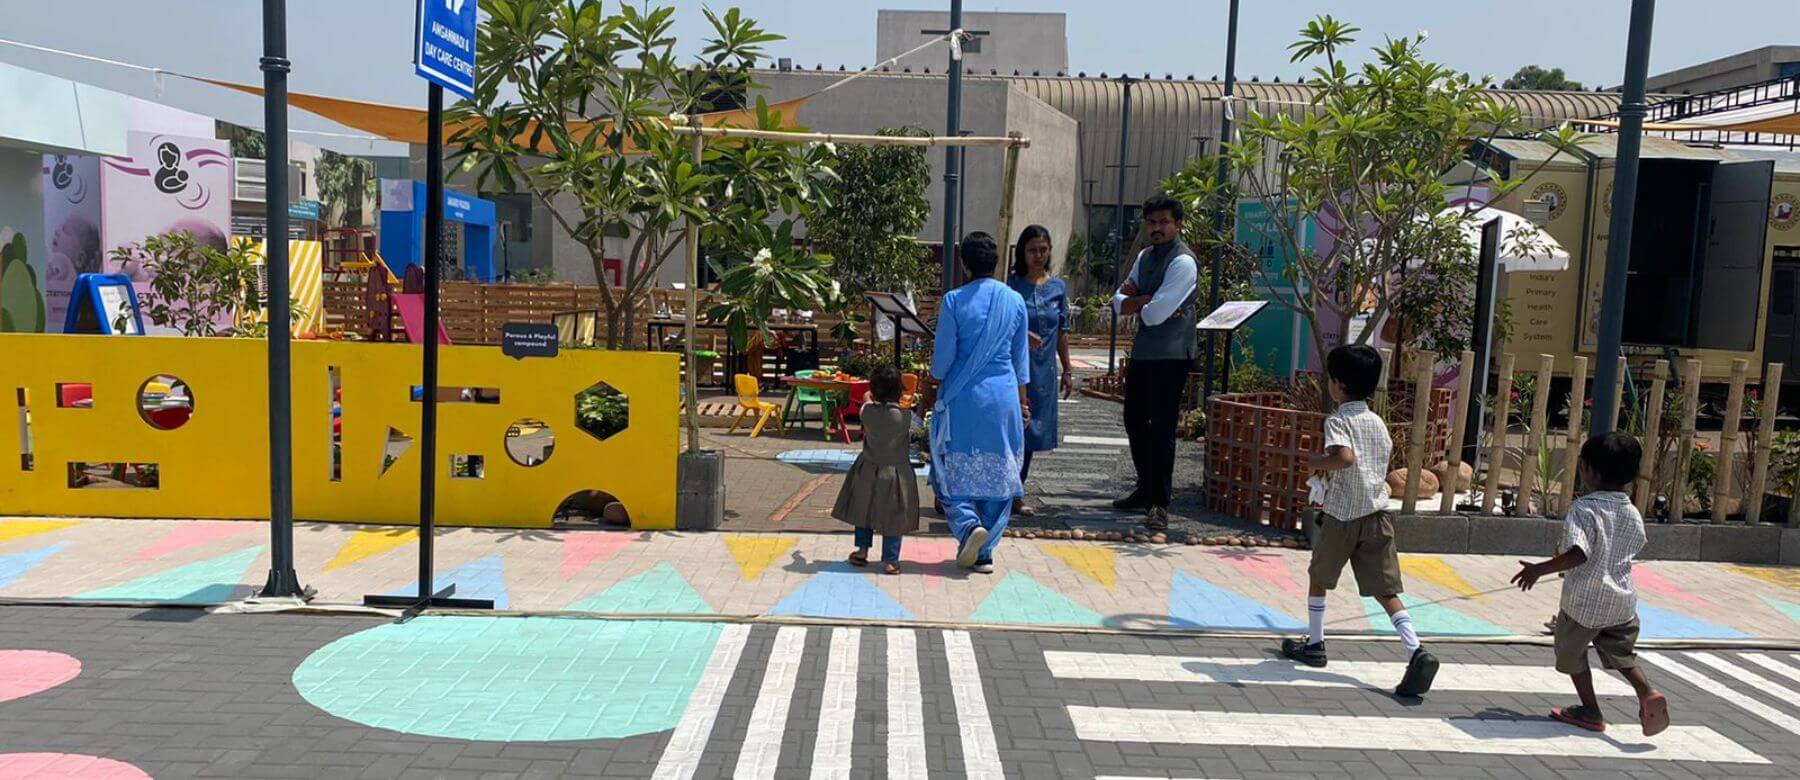 Prominent zebra crossings near early childhood facilities, parks and gardens are critical to ensure road safety